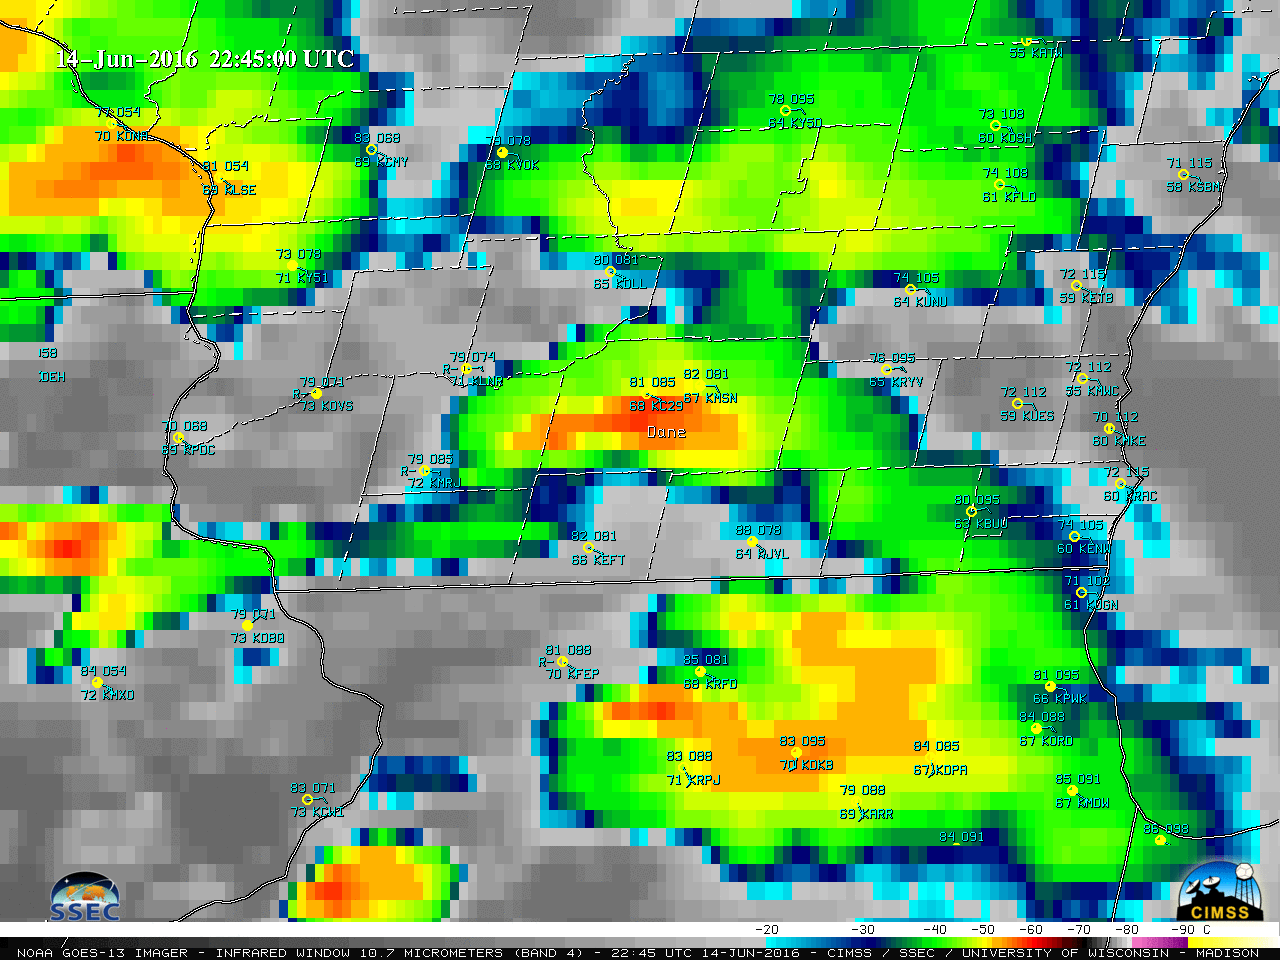 GOES-13 Infrared Window (10.7 µm) images [click to play animation]